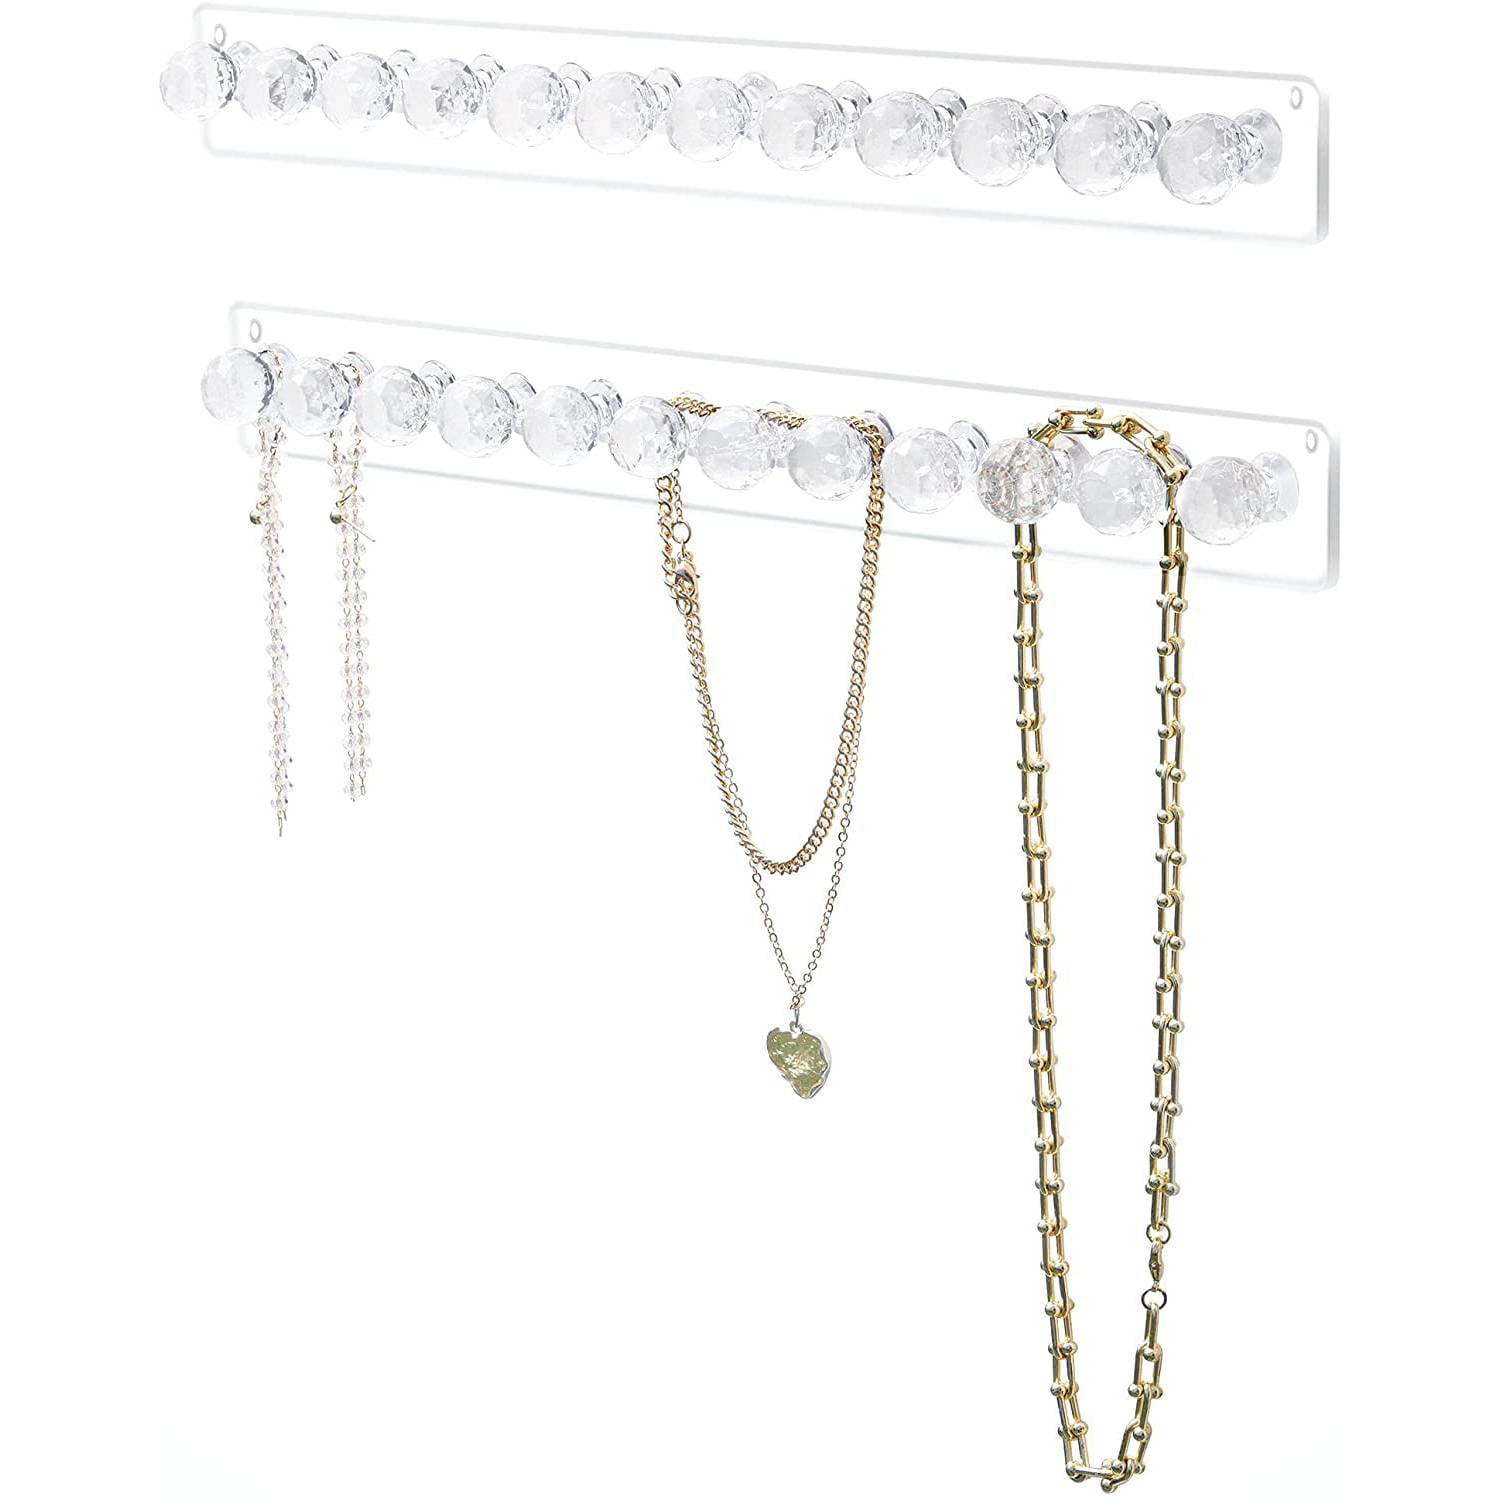 Necklace Holder, Acrylic Necklace Hanger, Wall Mount Necklace Organizer,  Jewelry Hooks for Necklaces, Bracelets, Chains (2-pack Clear) 